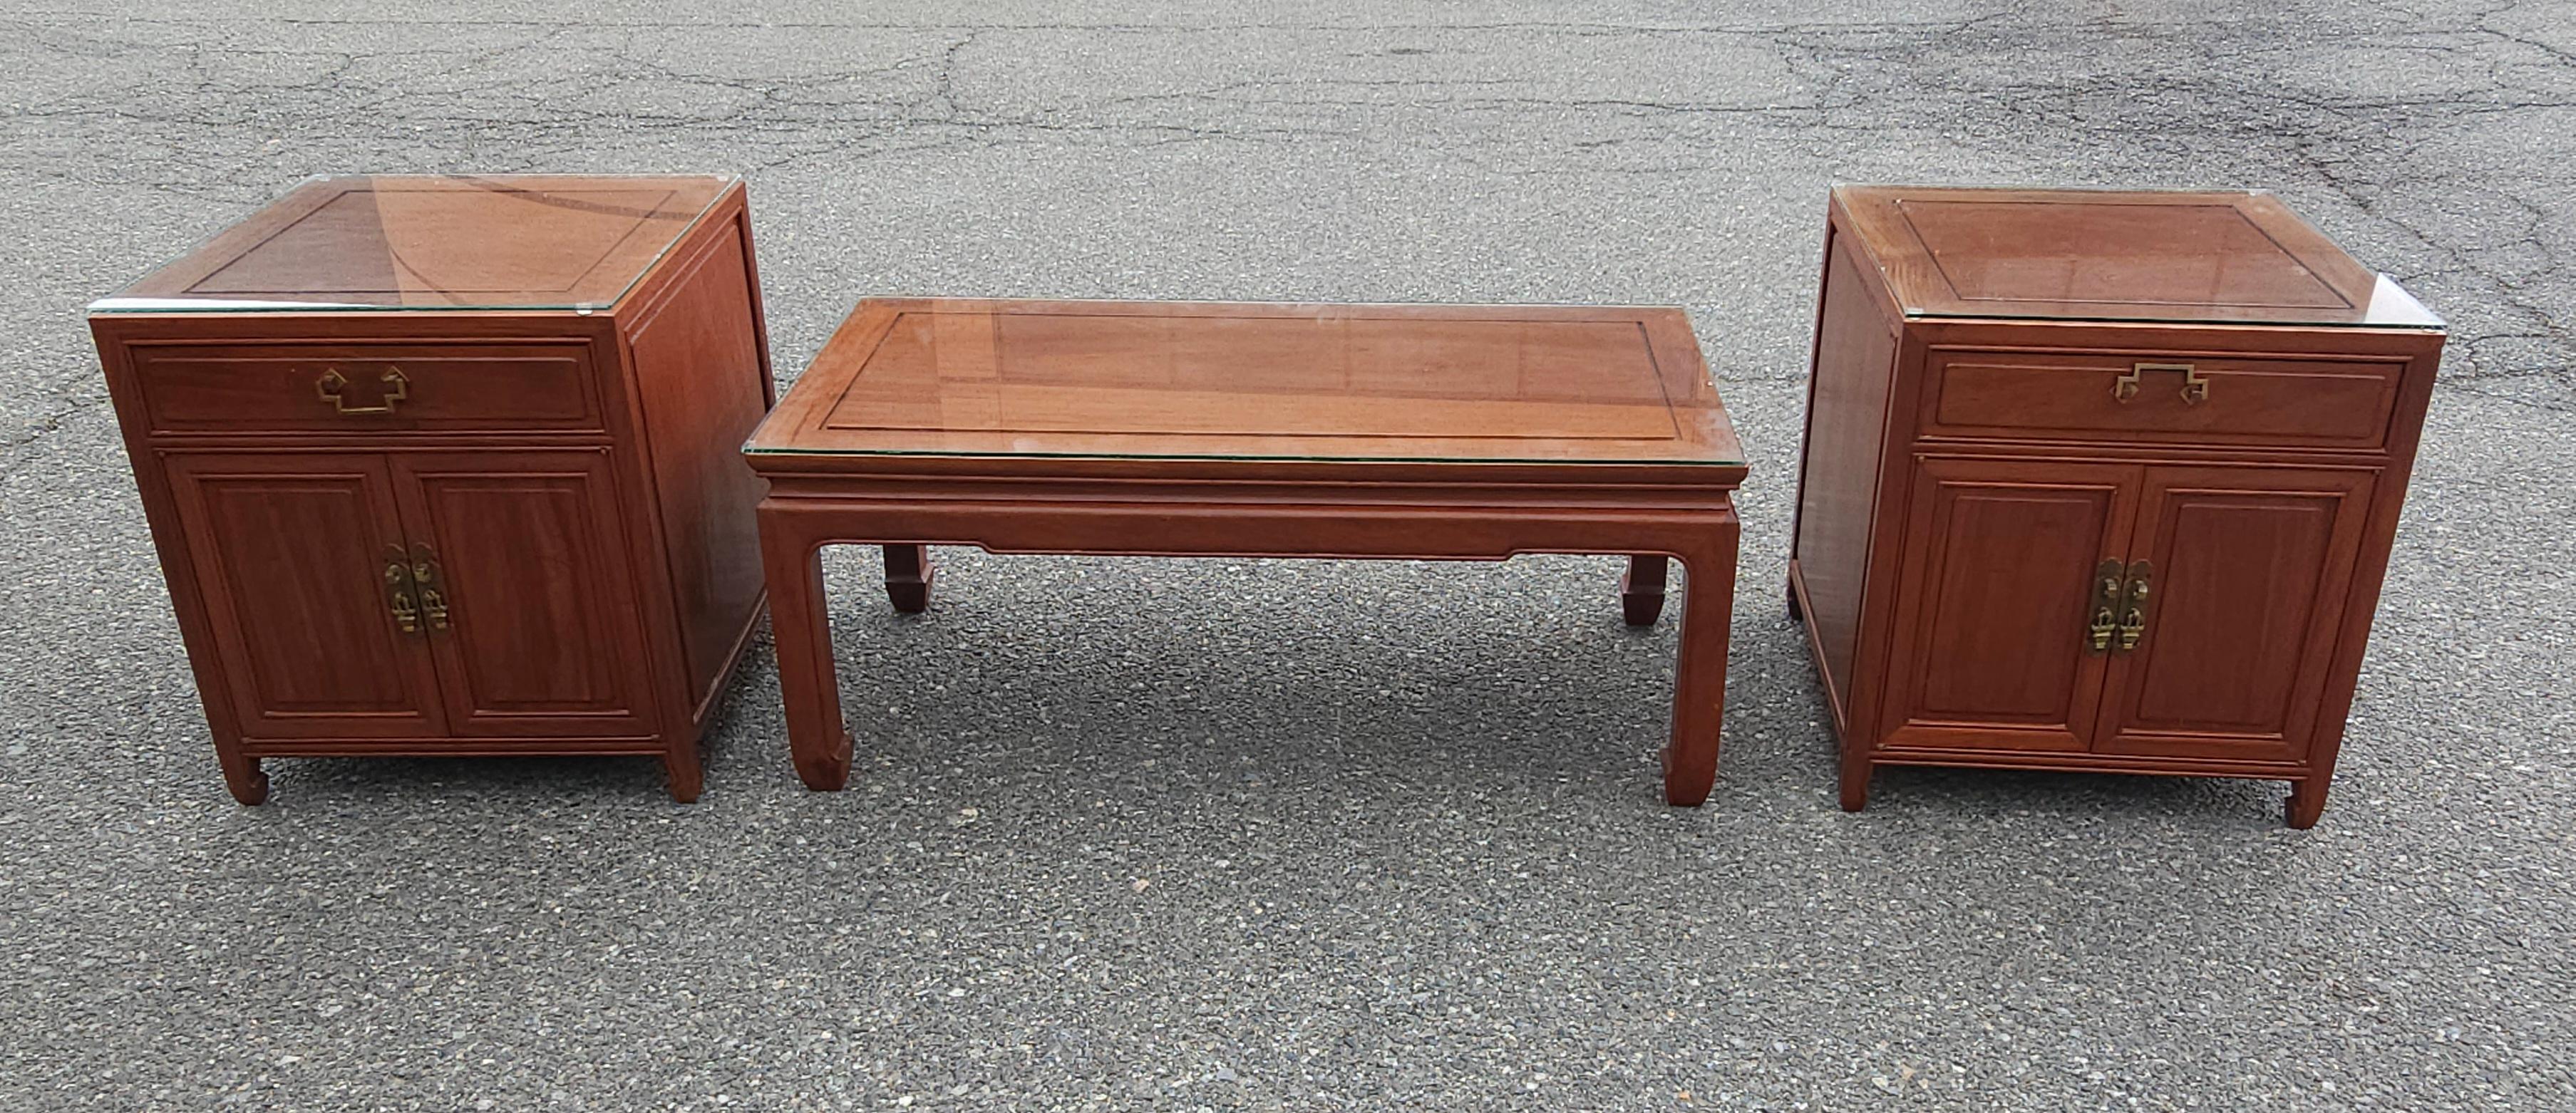 Mid 20th Century Ming Style Rosewood Coffe Table with Protective Glass Top For Sale 3